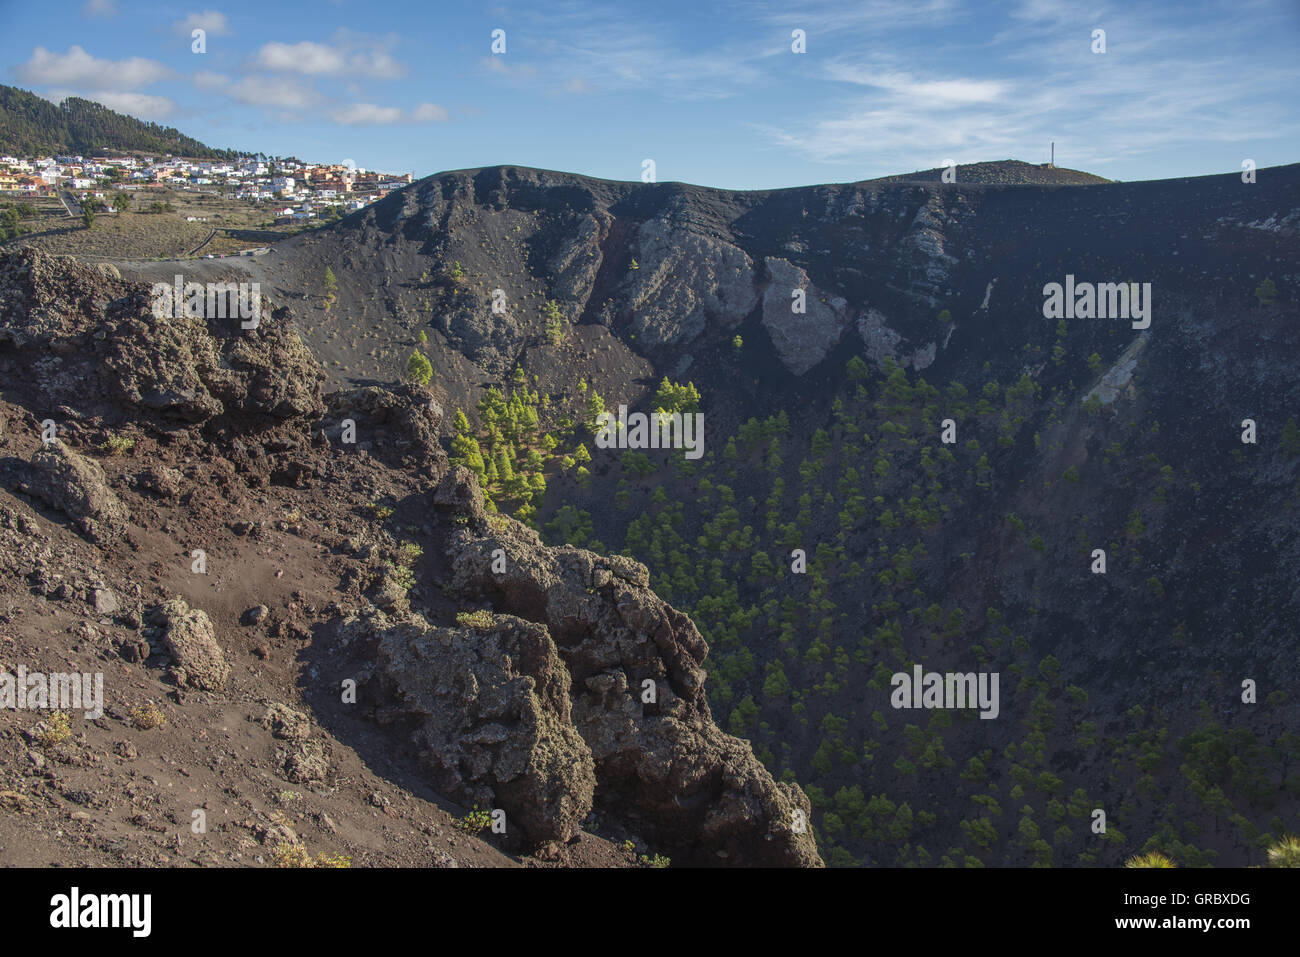 View From The Rim Of The Vulcano San Juan Into The Caldera And It S Pine Forest In The Background Los Canarios  Fuencaliente, La Palma, Canary Islands. Stock Photo